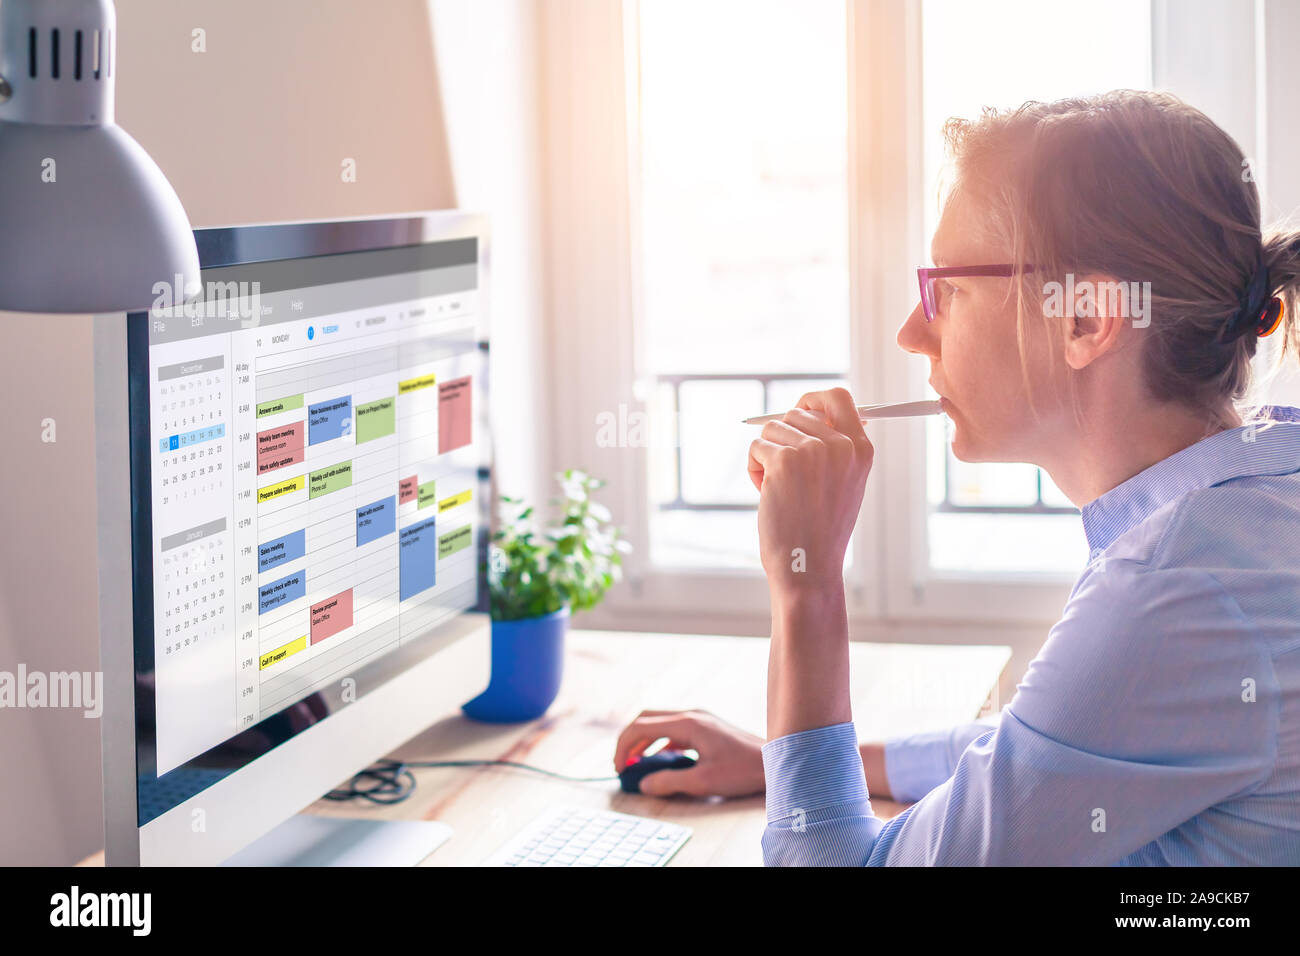 Person using calendar on computer to improve time management, plan appointments, events, tasks and meetings efficiently, improve productivity, organiz Stock Photo